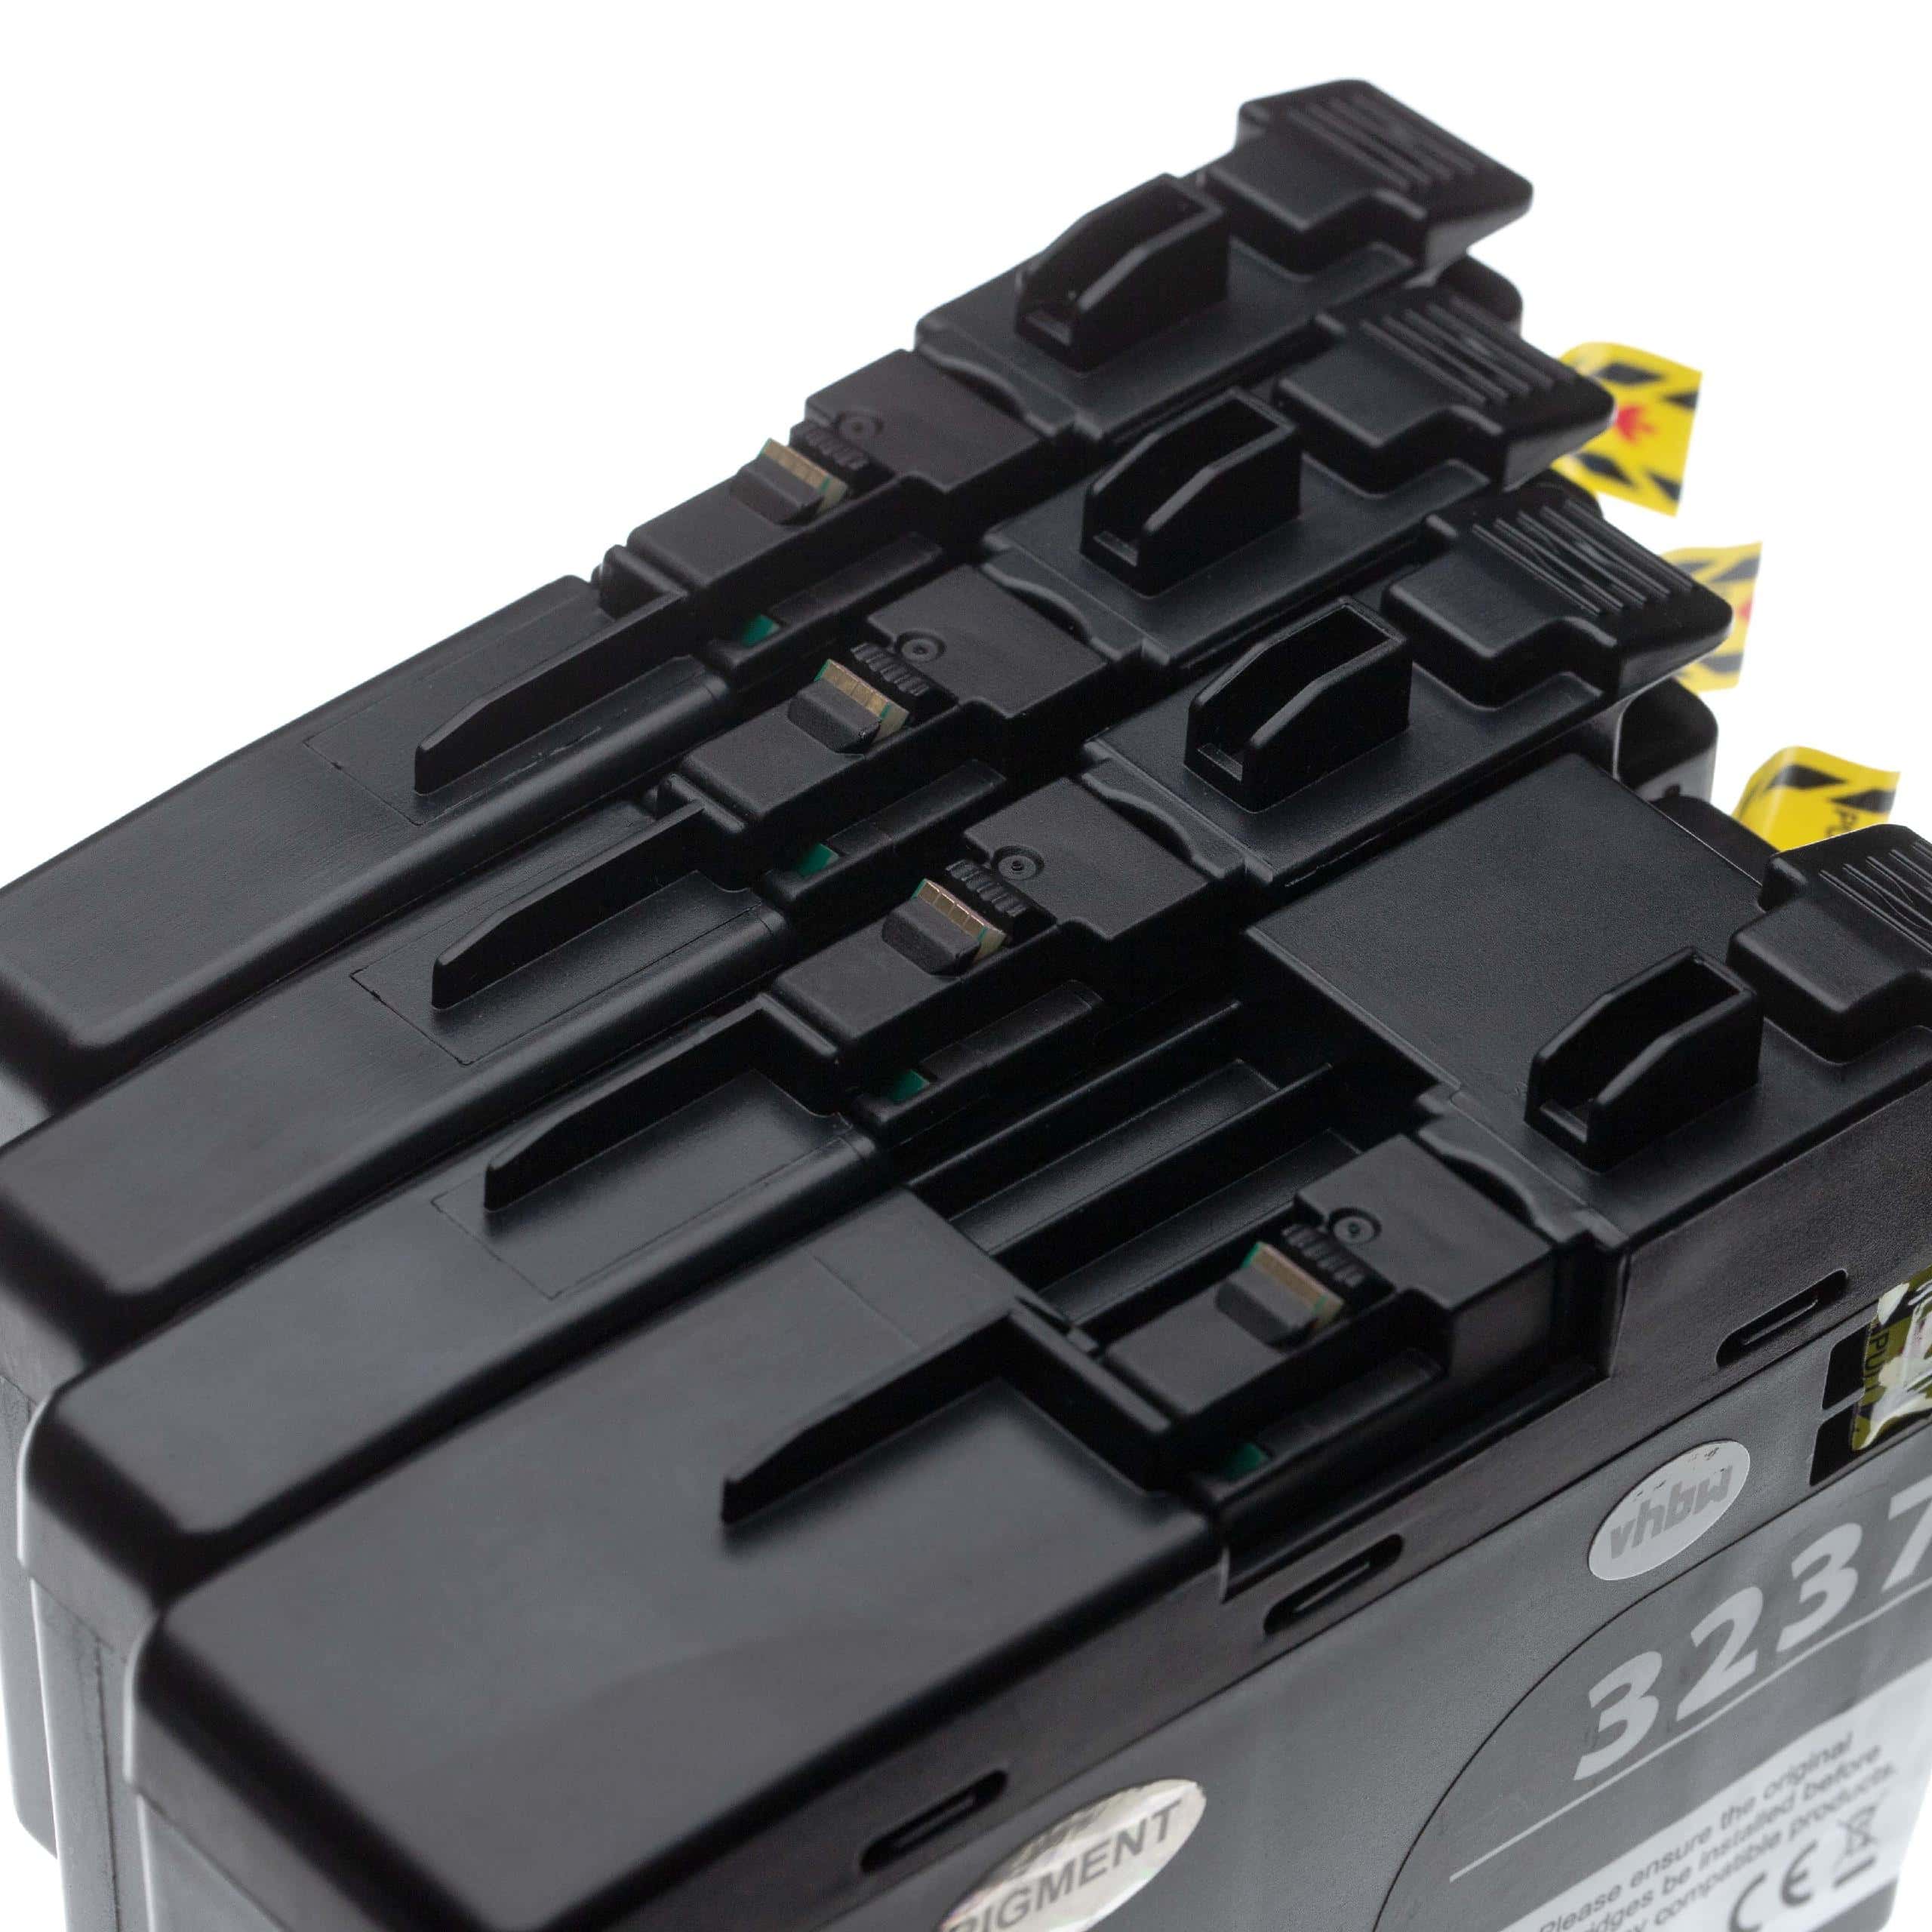 4x Ink Cartridges replaces Brother LC-3237BK, LC3237BK, LC3237C, LC-3237C for HL-J6000DW Printer - B/C/M/Y